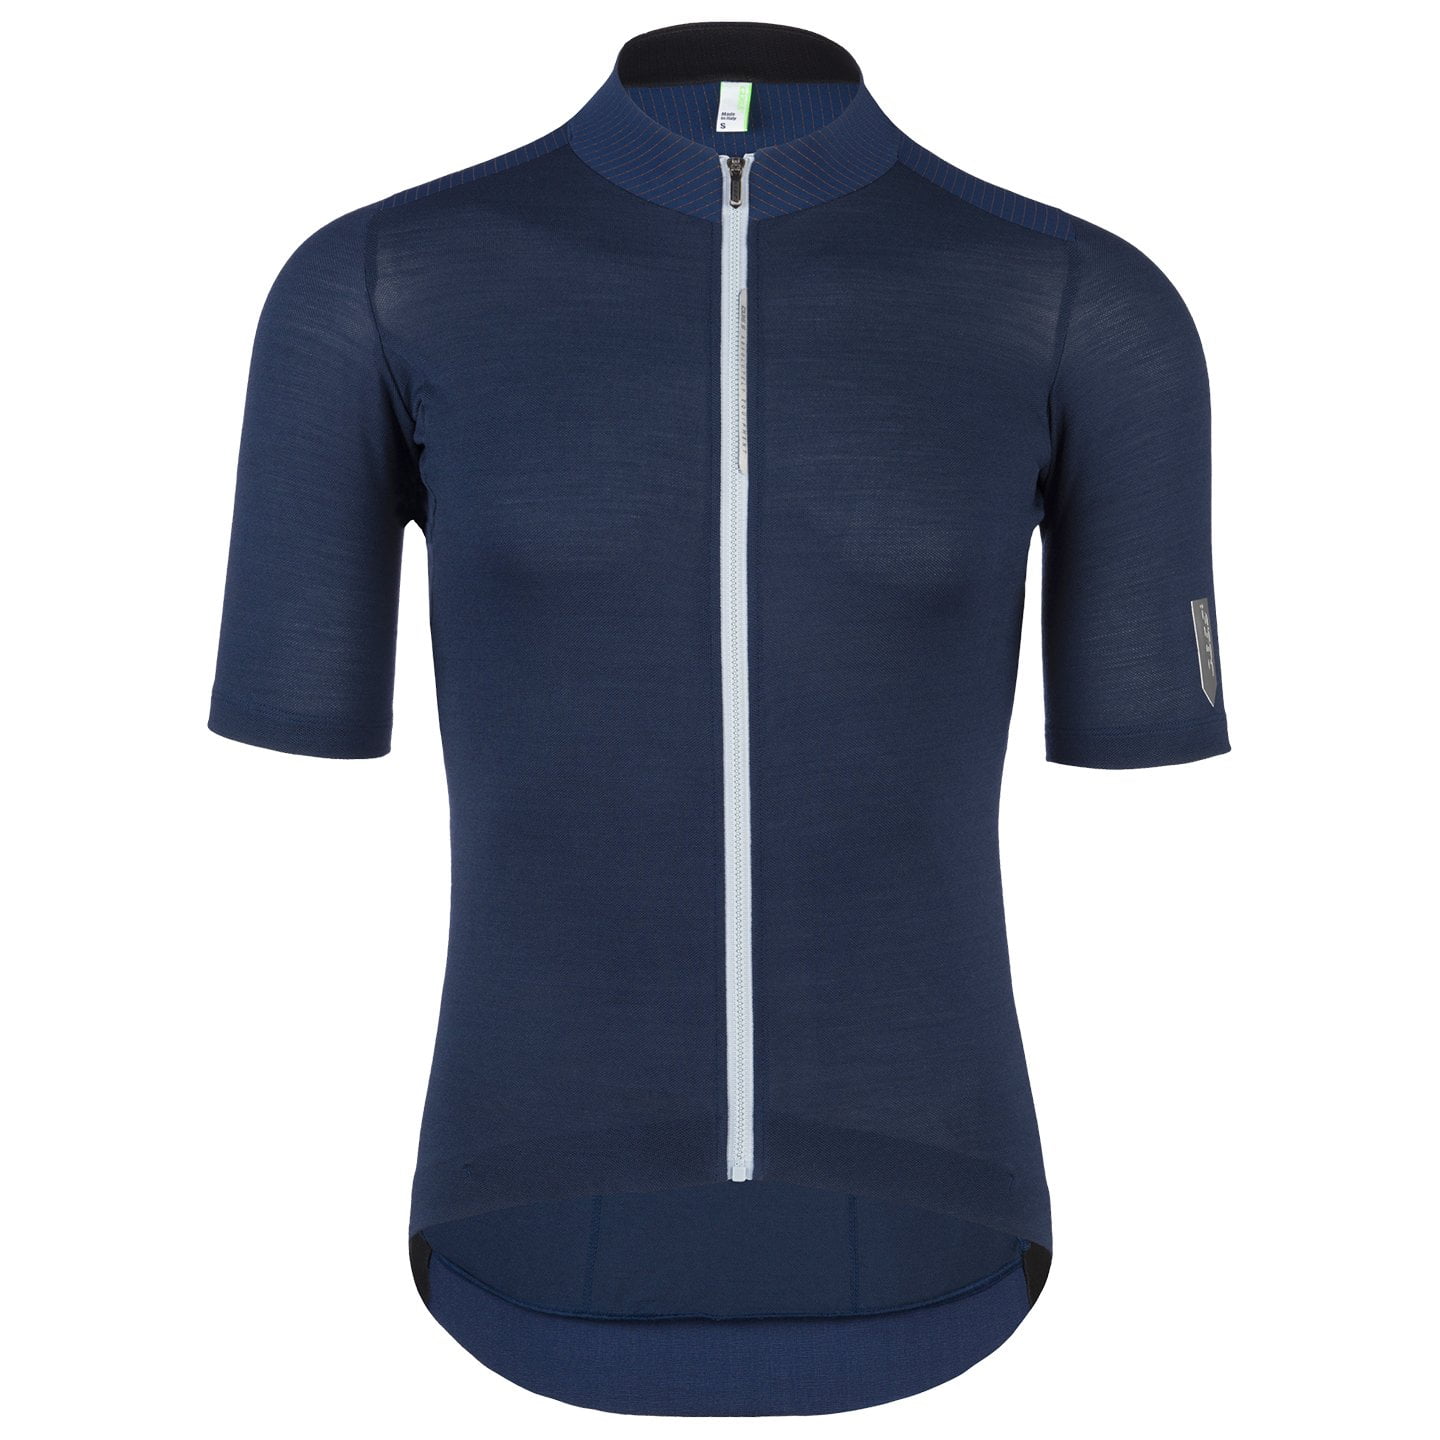 Q36.5 Adventure Short Sleeve Jersey, for men, size L, Cycling jersey, Cycling clothing